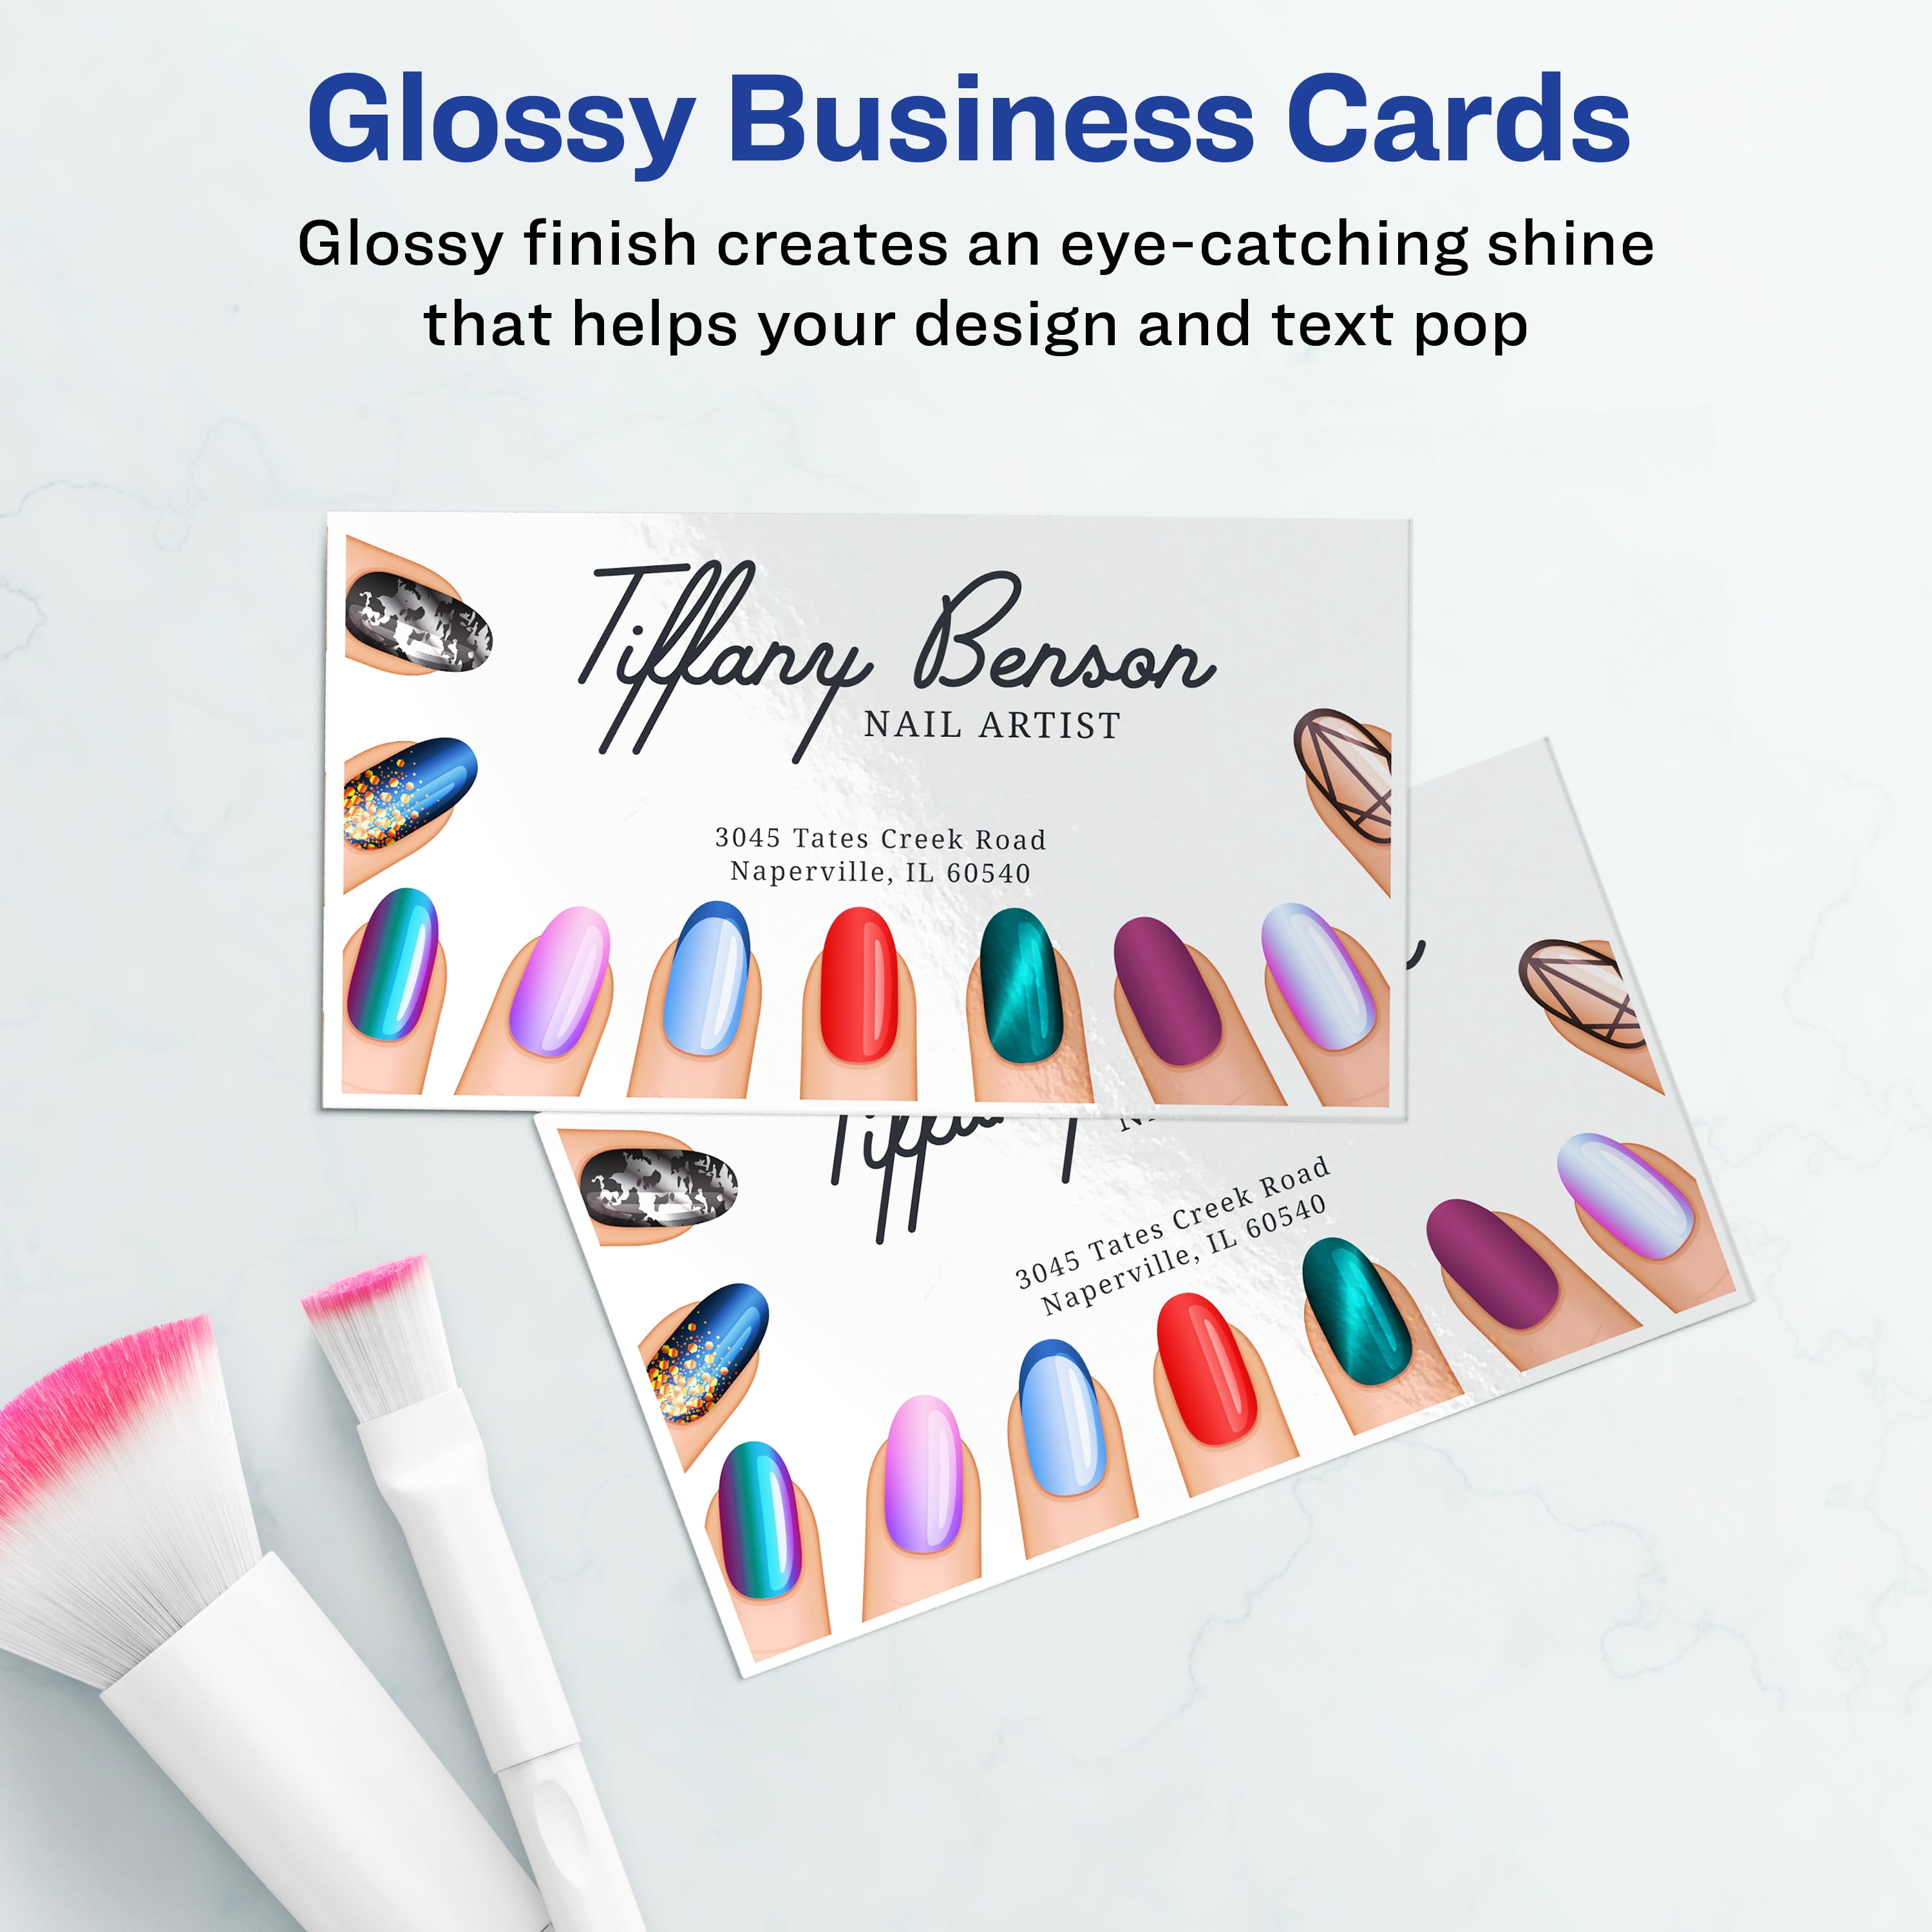  Avery Printable Business Cards, Inkjet Printers, 200 Cards(Pack  of 1), 2 x 3.5, Clean Edge, Heavyweight (8871) : Business Card Stock :  Office Products